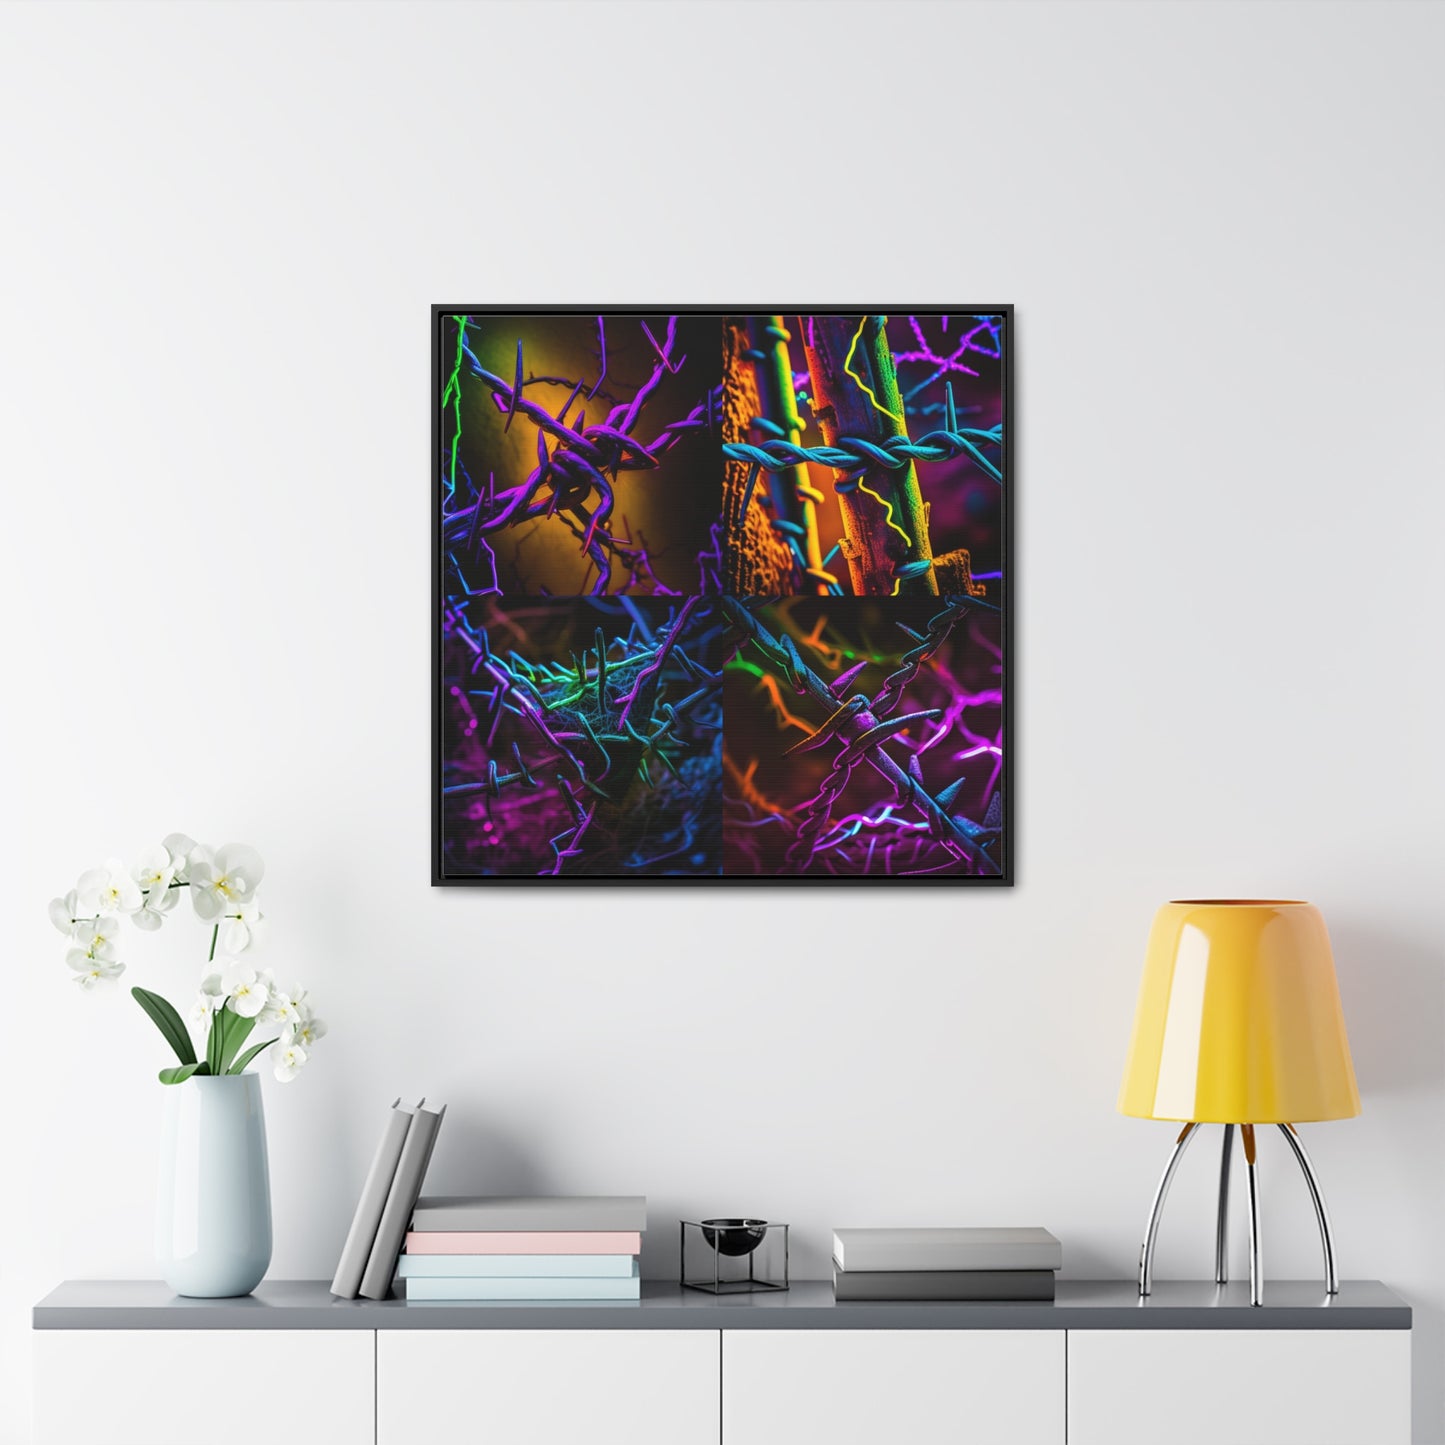 Gallery Canvas Wraps, Square Frame Macro Neon Barb